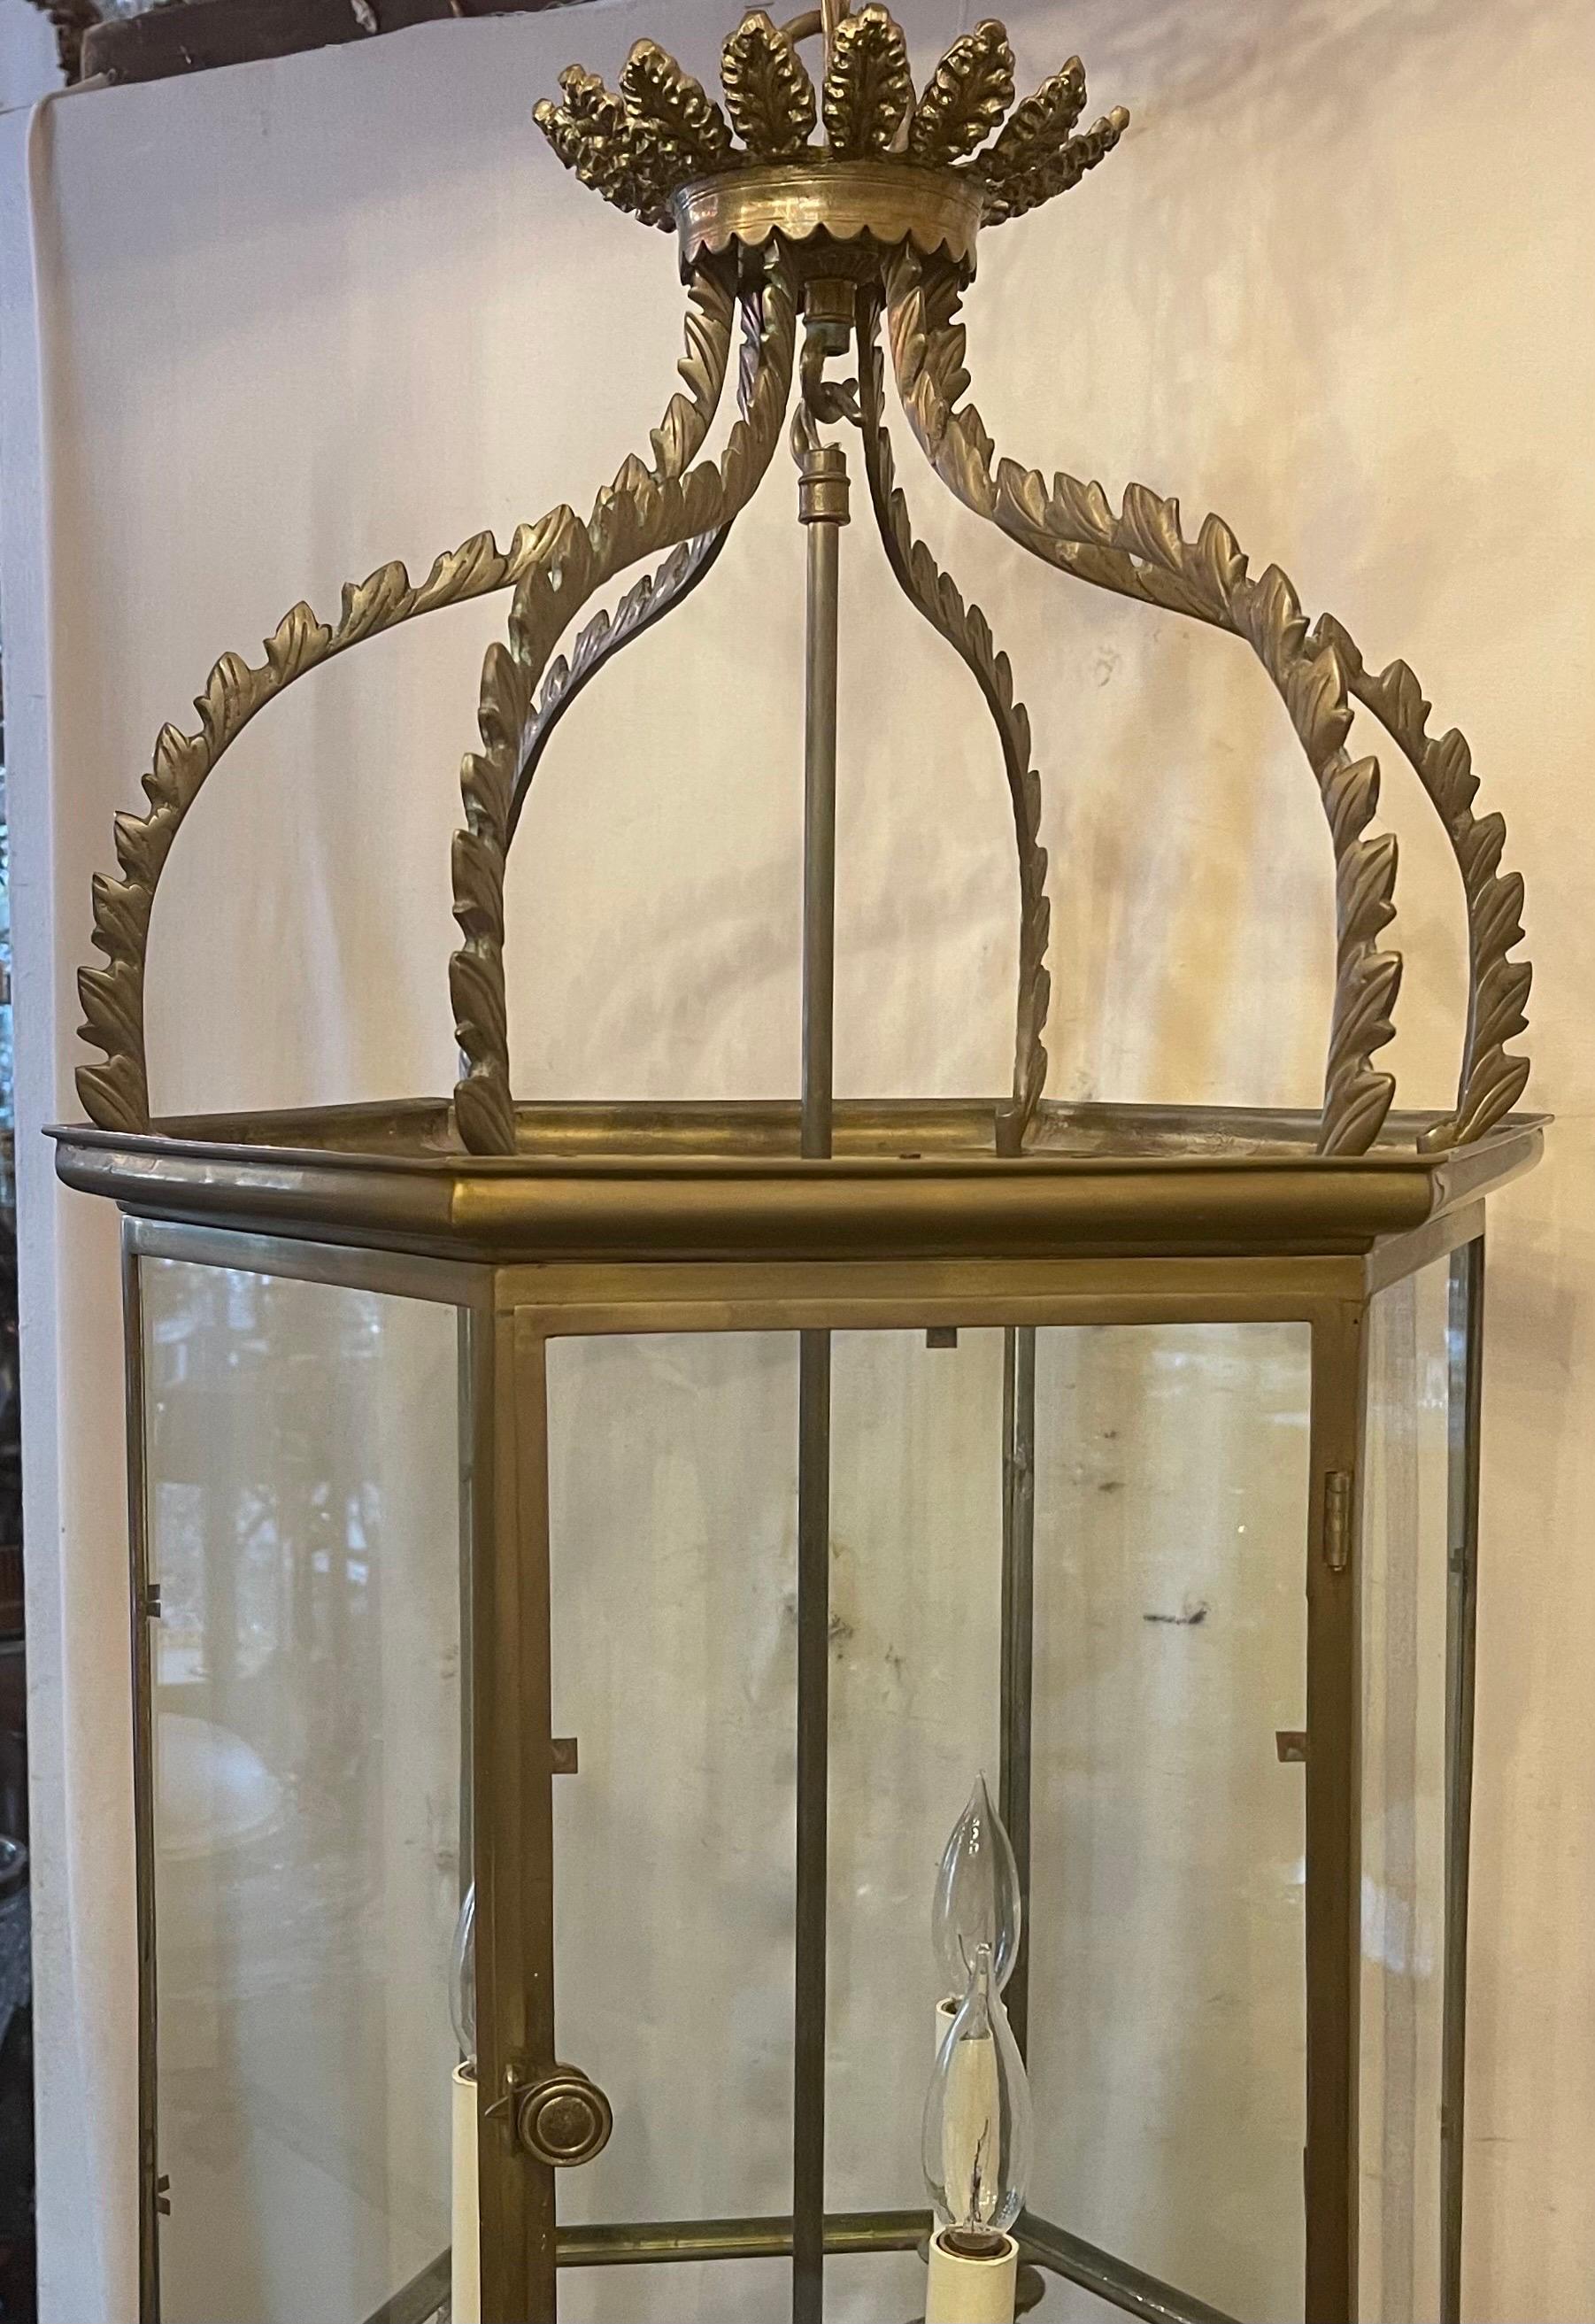 A Wonderful Vaughan lighting bronze / brass regency hall lantern, This Classic Lantern is Based On A 19th Century Six-Sided Fixture That Is Finished With Feathered Detailing And A Leaf-Like Top Coronet, With A 3 Light Cluster Inside, Accompanied By